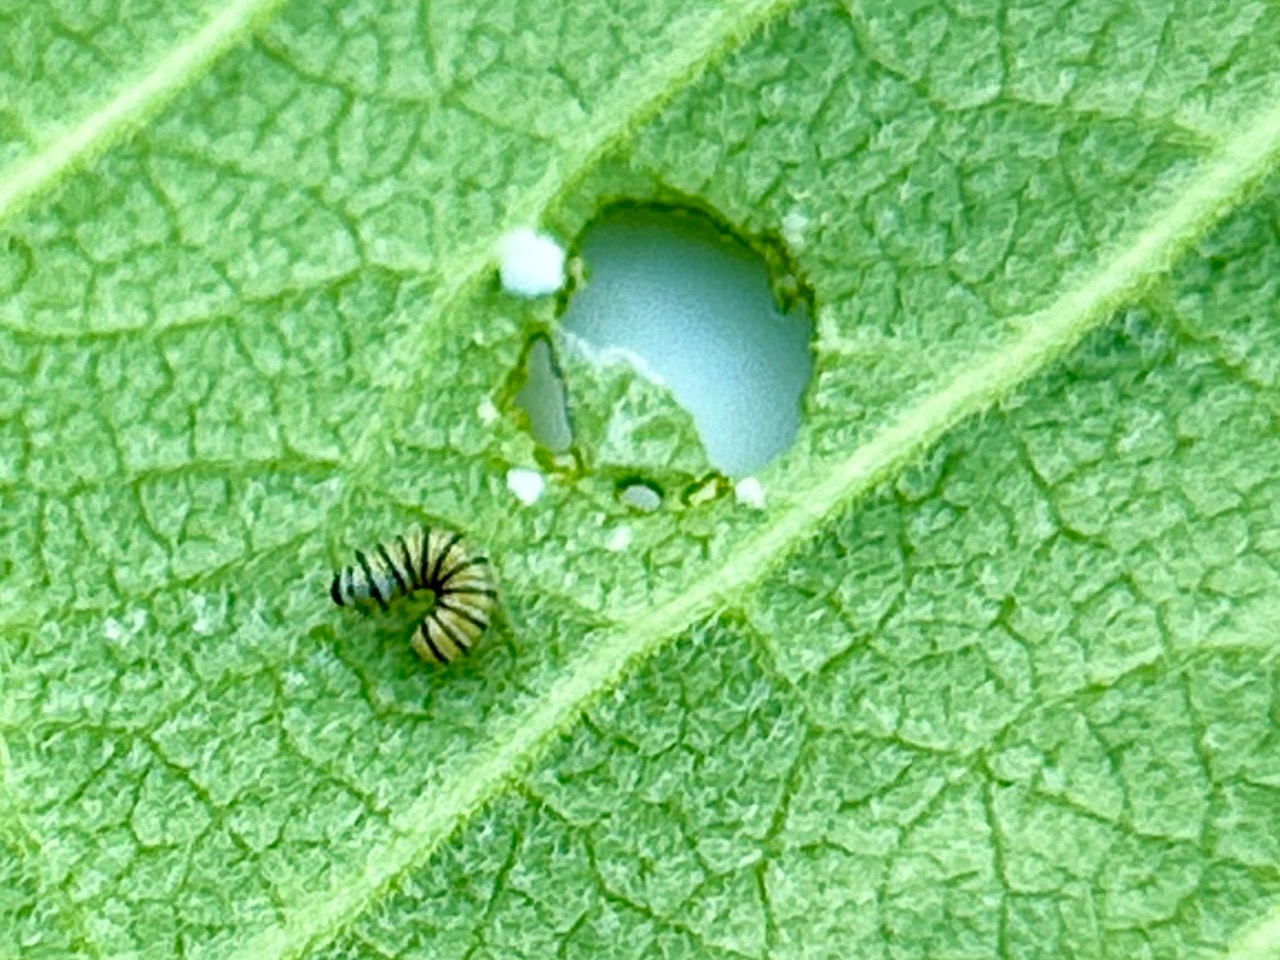 A monarch caterpillar on a leaf with a hole in it